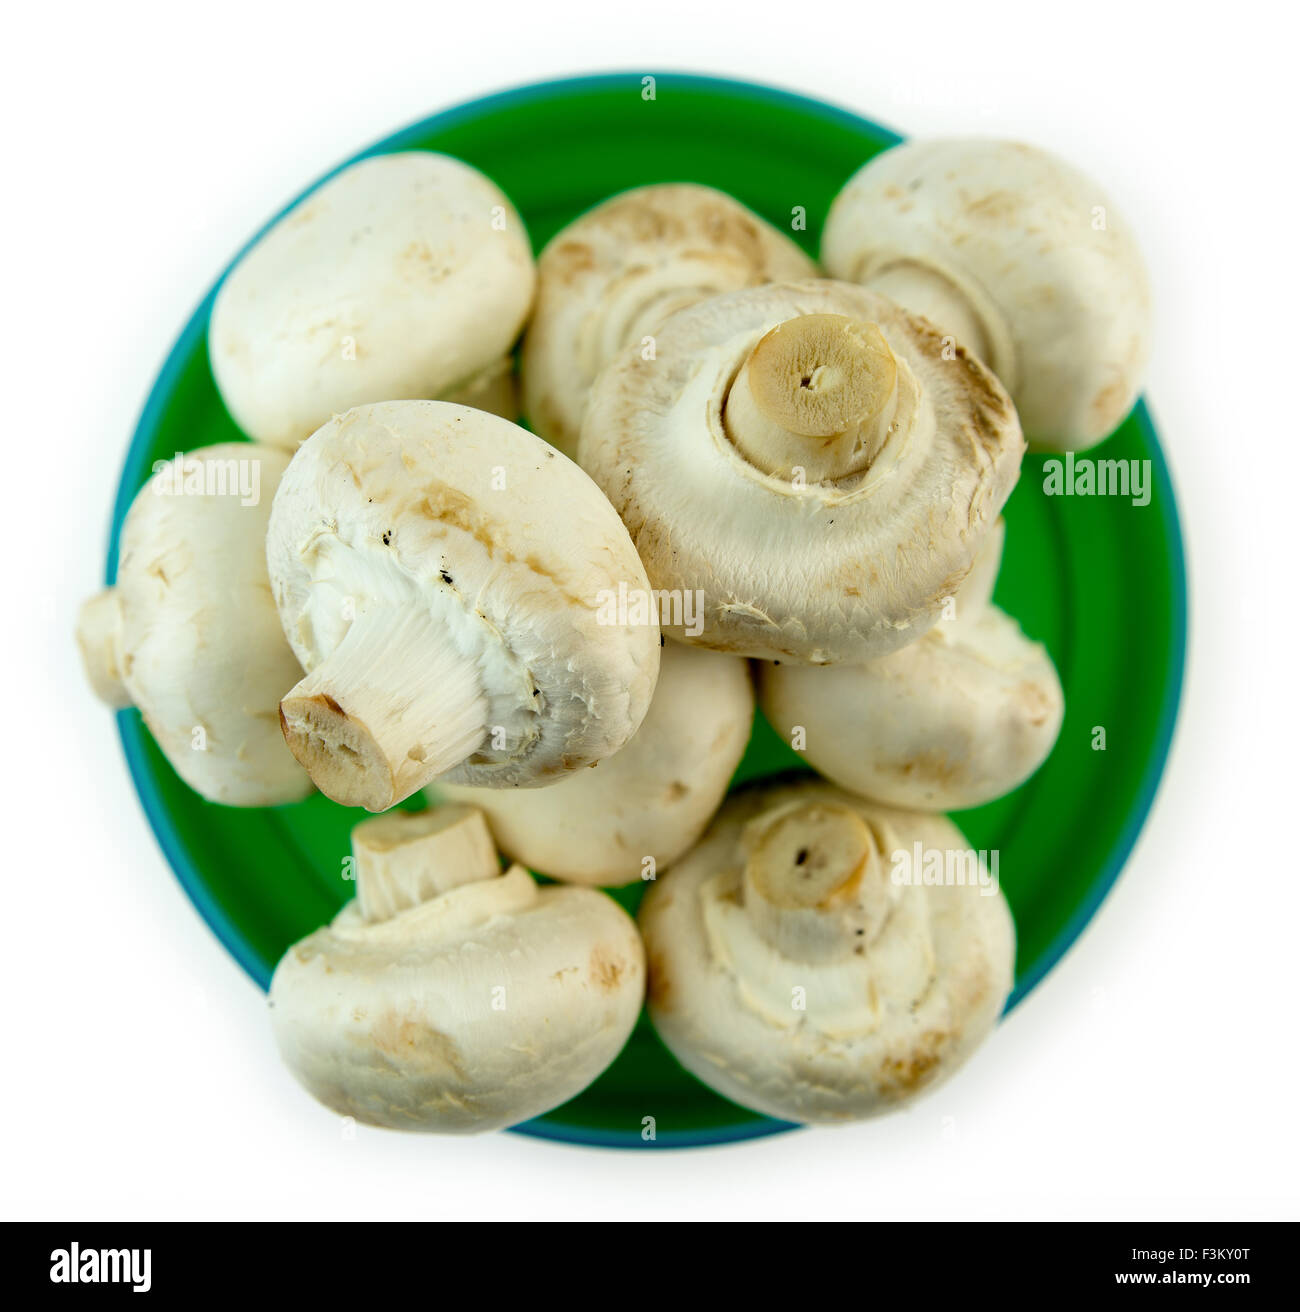 Uncooked mushrooms stacked in green bowl against white background Stock Photo